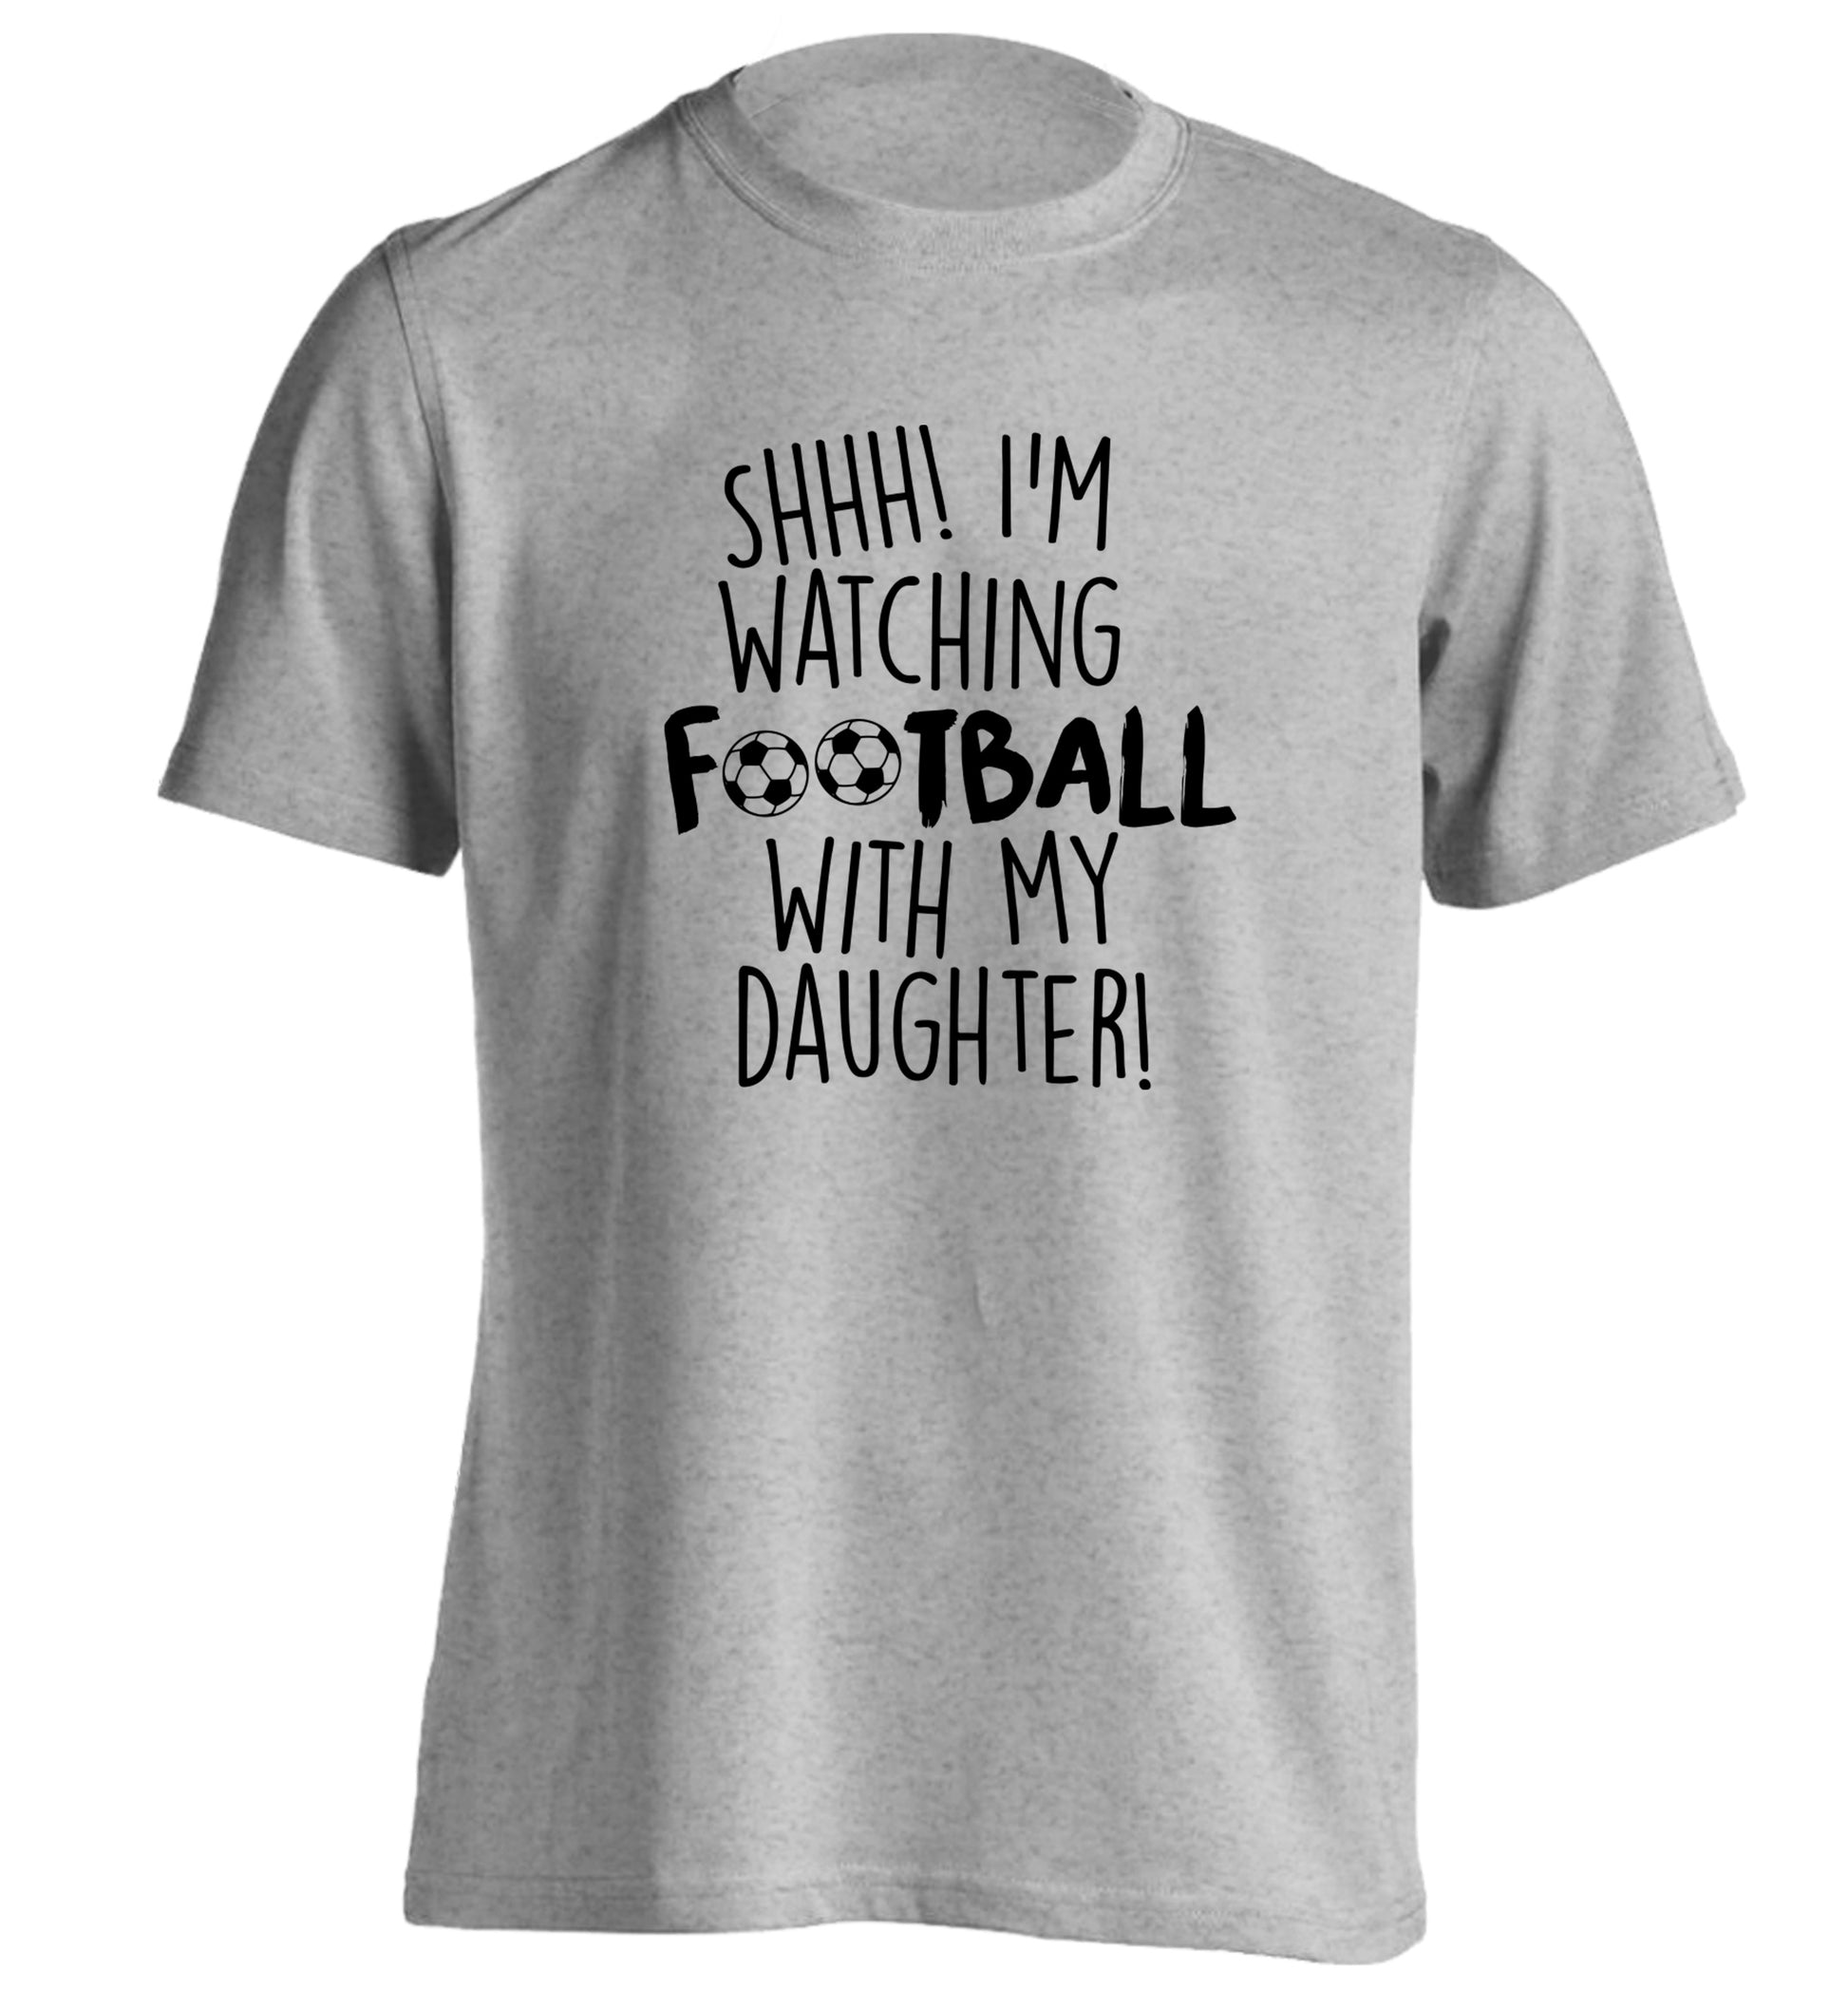 Shhh I'm watching football with my daughter adults unisexgrey Tshirt 2XL